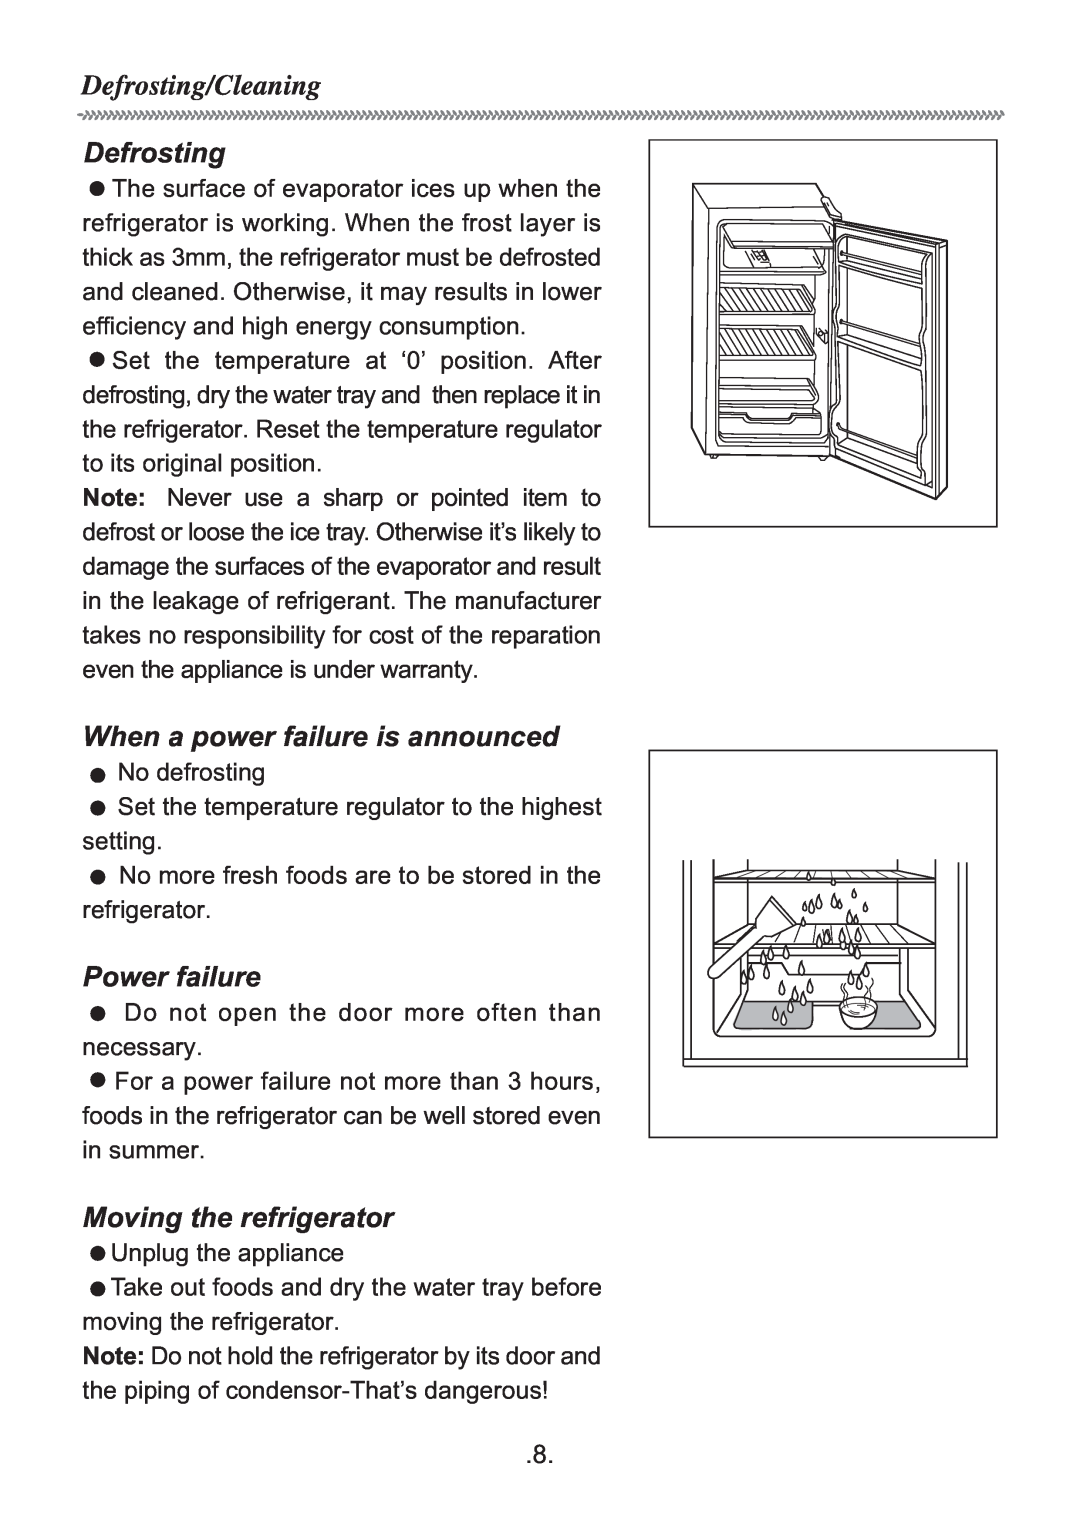 Haier HR-135A manual Defrosting/Cleaning, When a power failure is announced, Power failure, Moving the refrigerator 